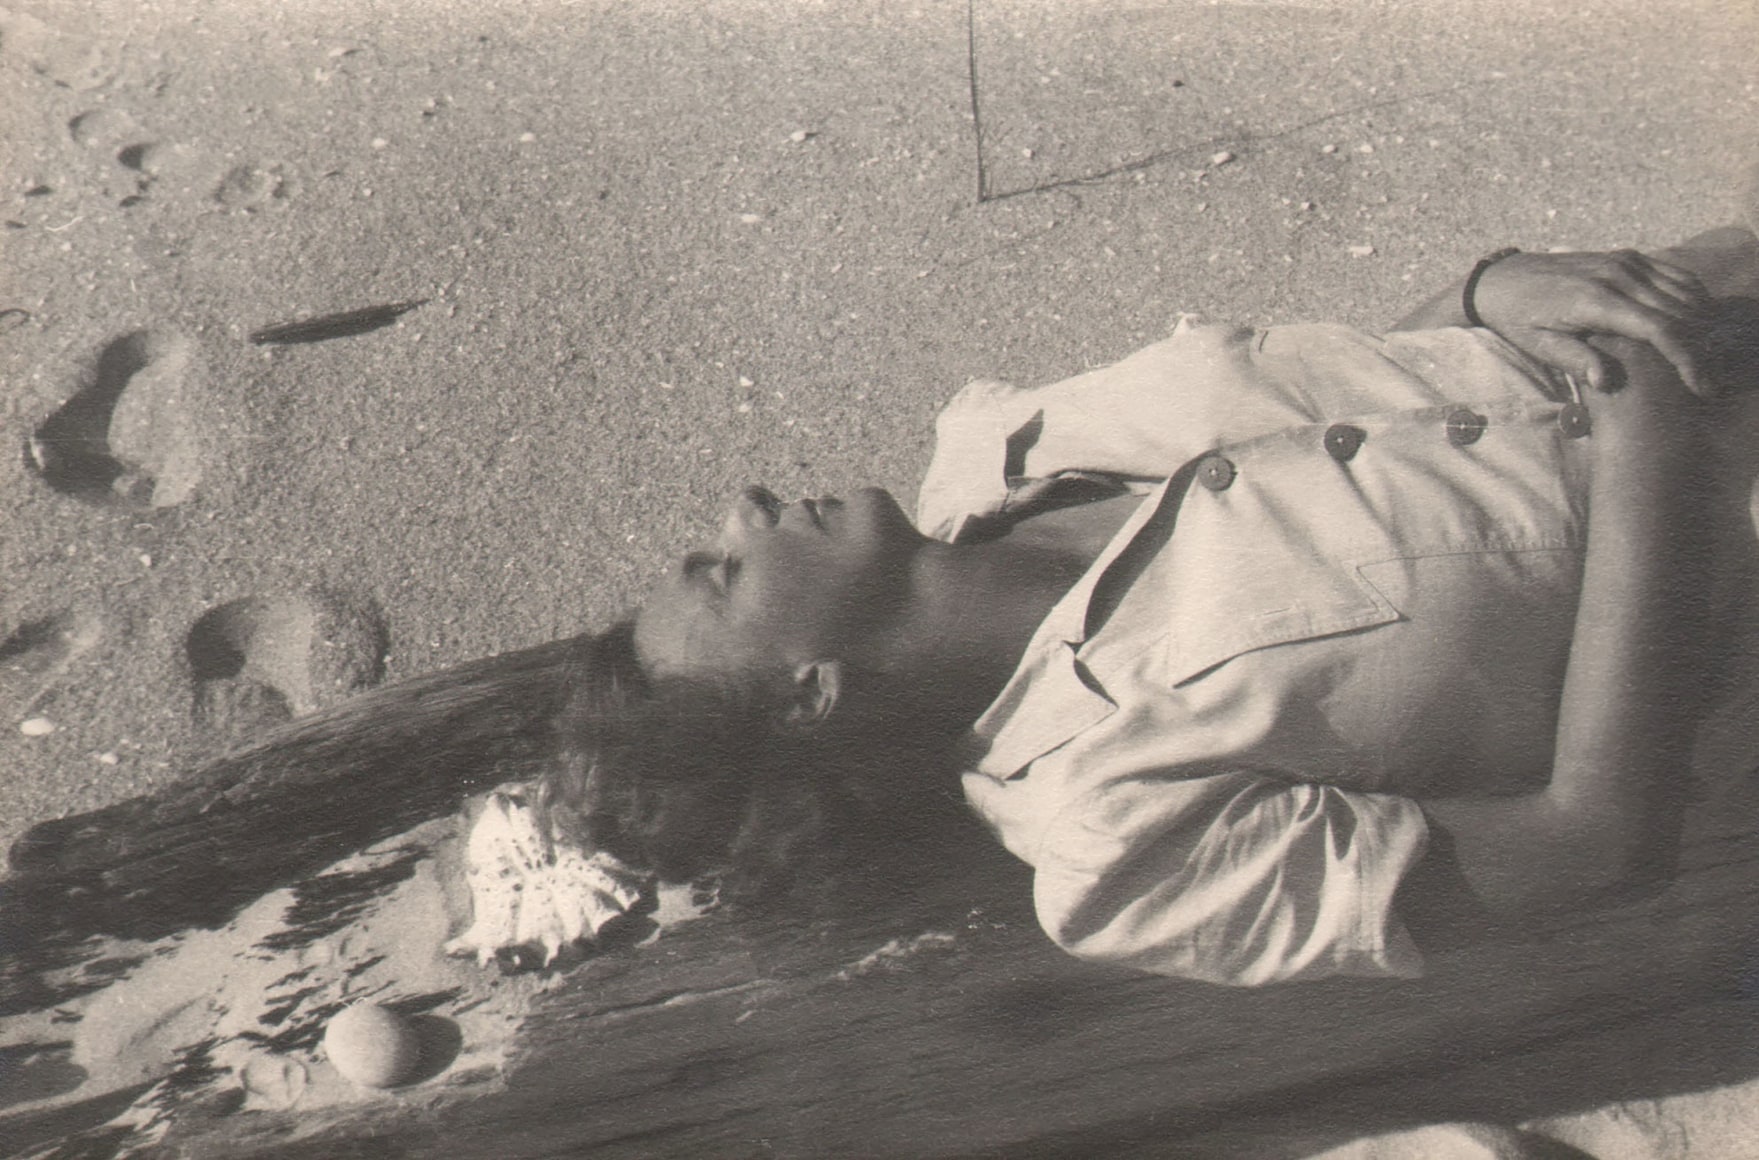 PaJaMa, Margaret French, Fire Island, c. 1945. A woman in white's upper torso extends from the right of the frame; she is laying on a piece of driftwood on the beach.